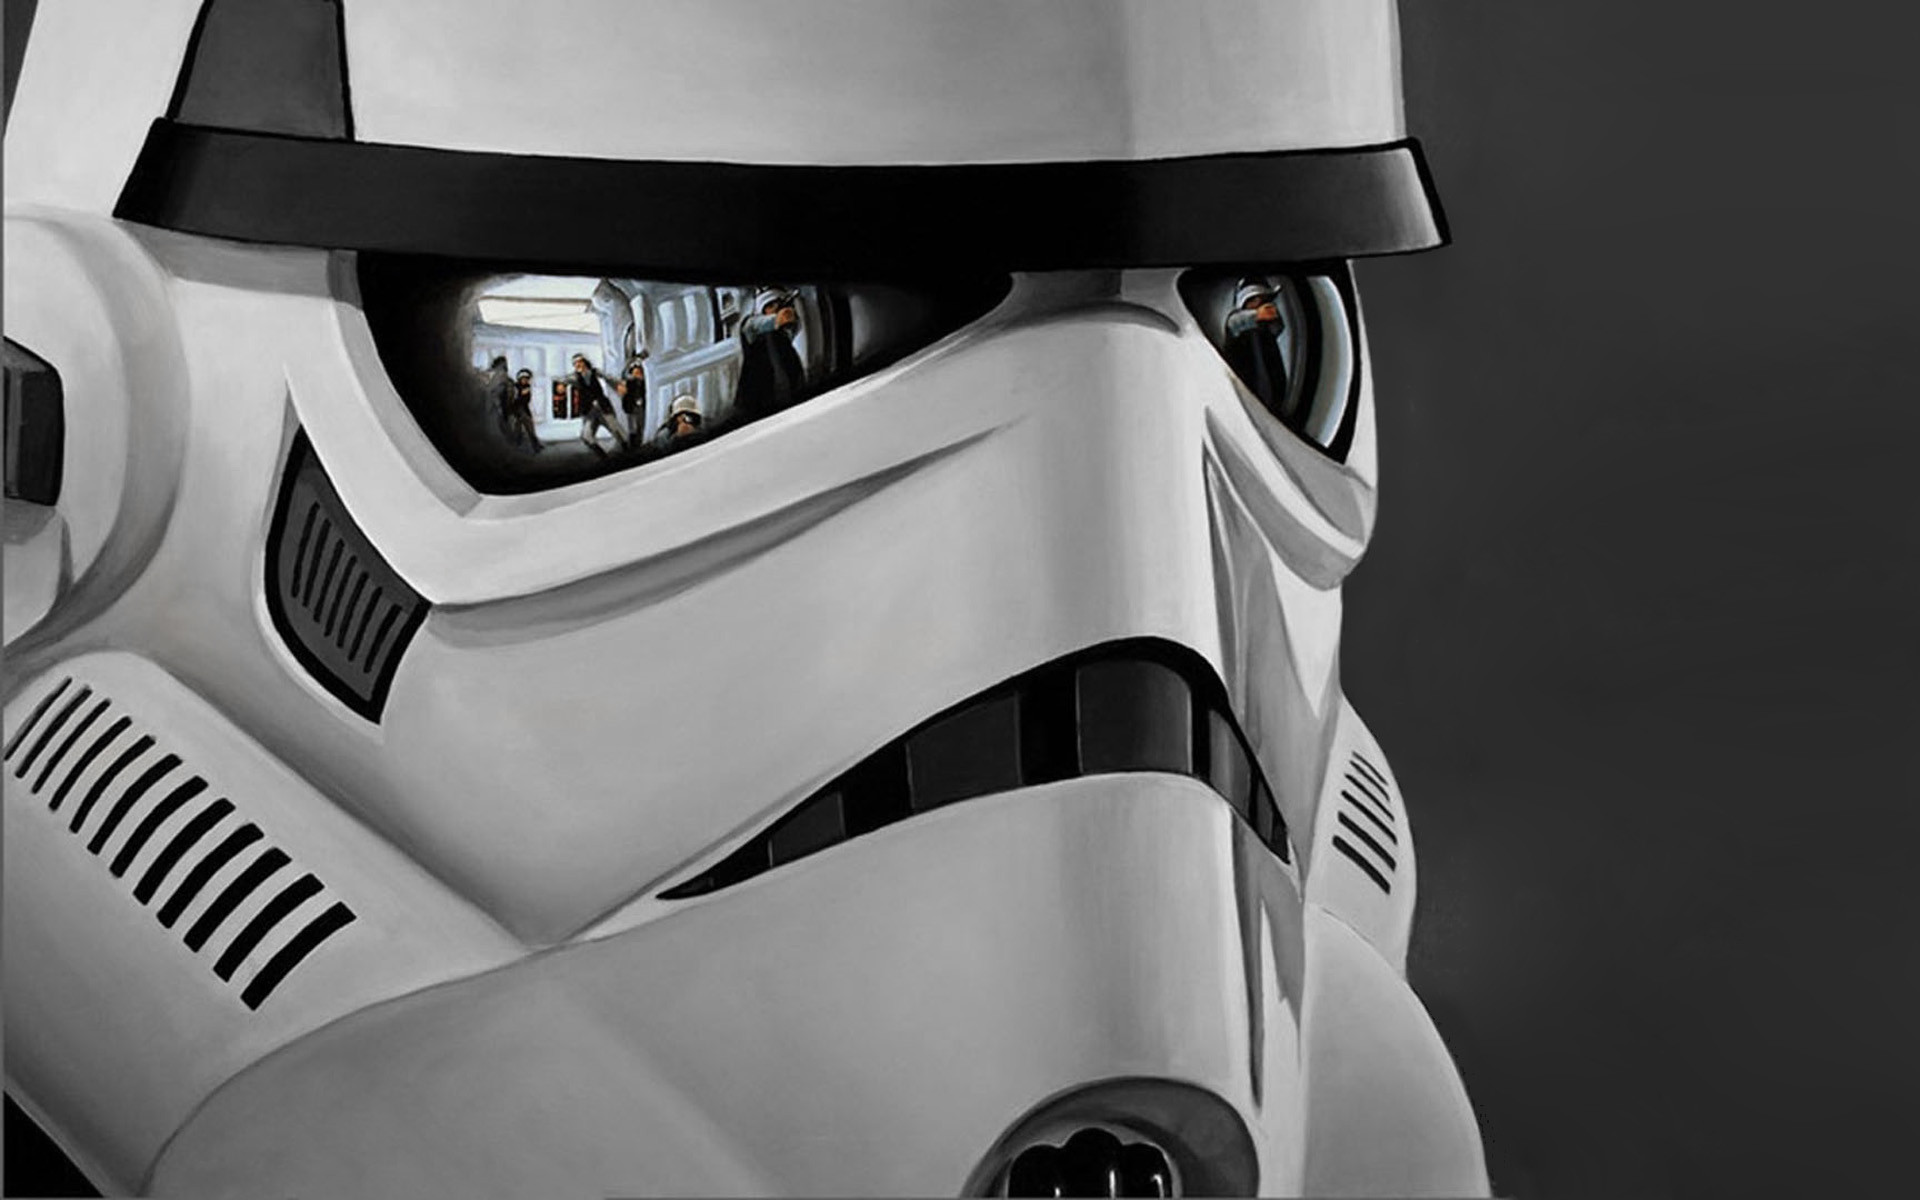 Coolest Backgrounds Ever - 1440p Star Wars - HD Wallpaper 